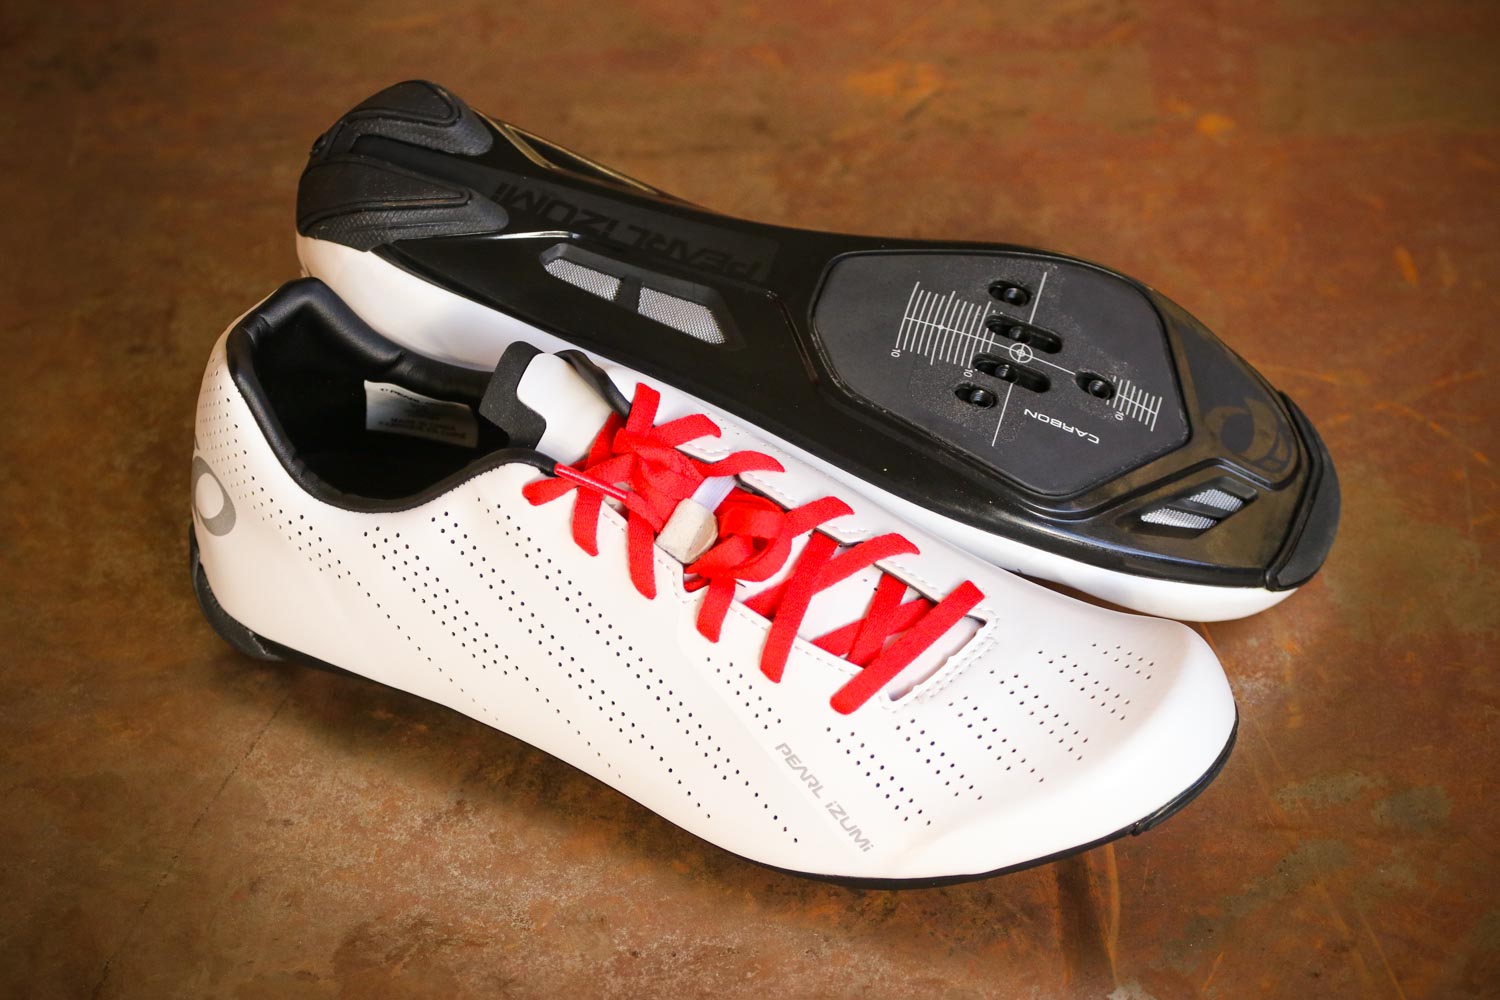 pearl izumi wide cycling shoes